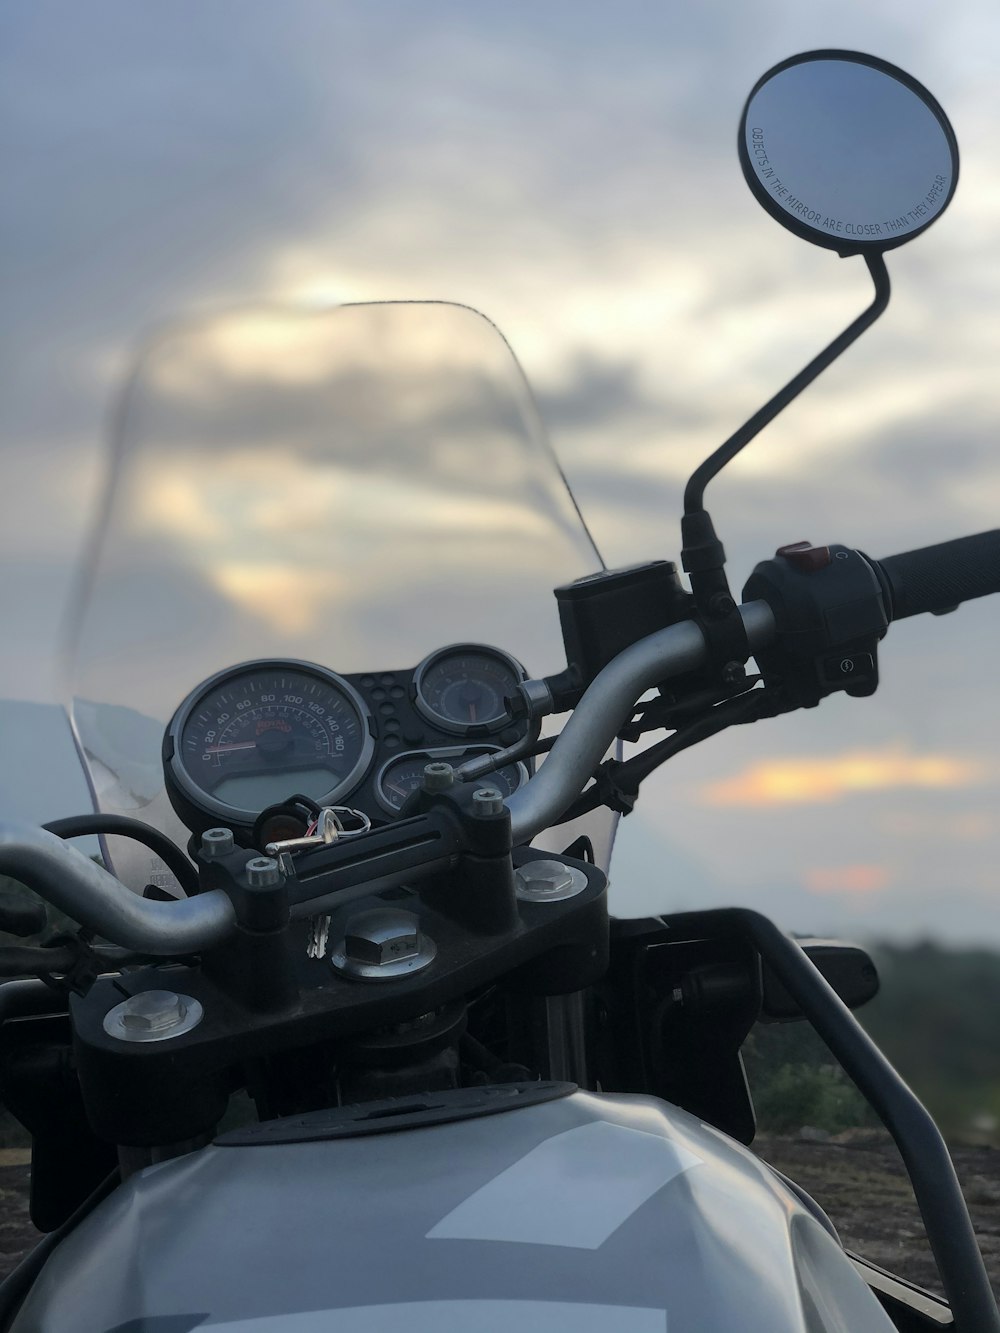 black motorcycle with light during sunset